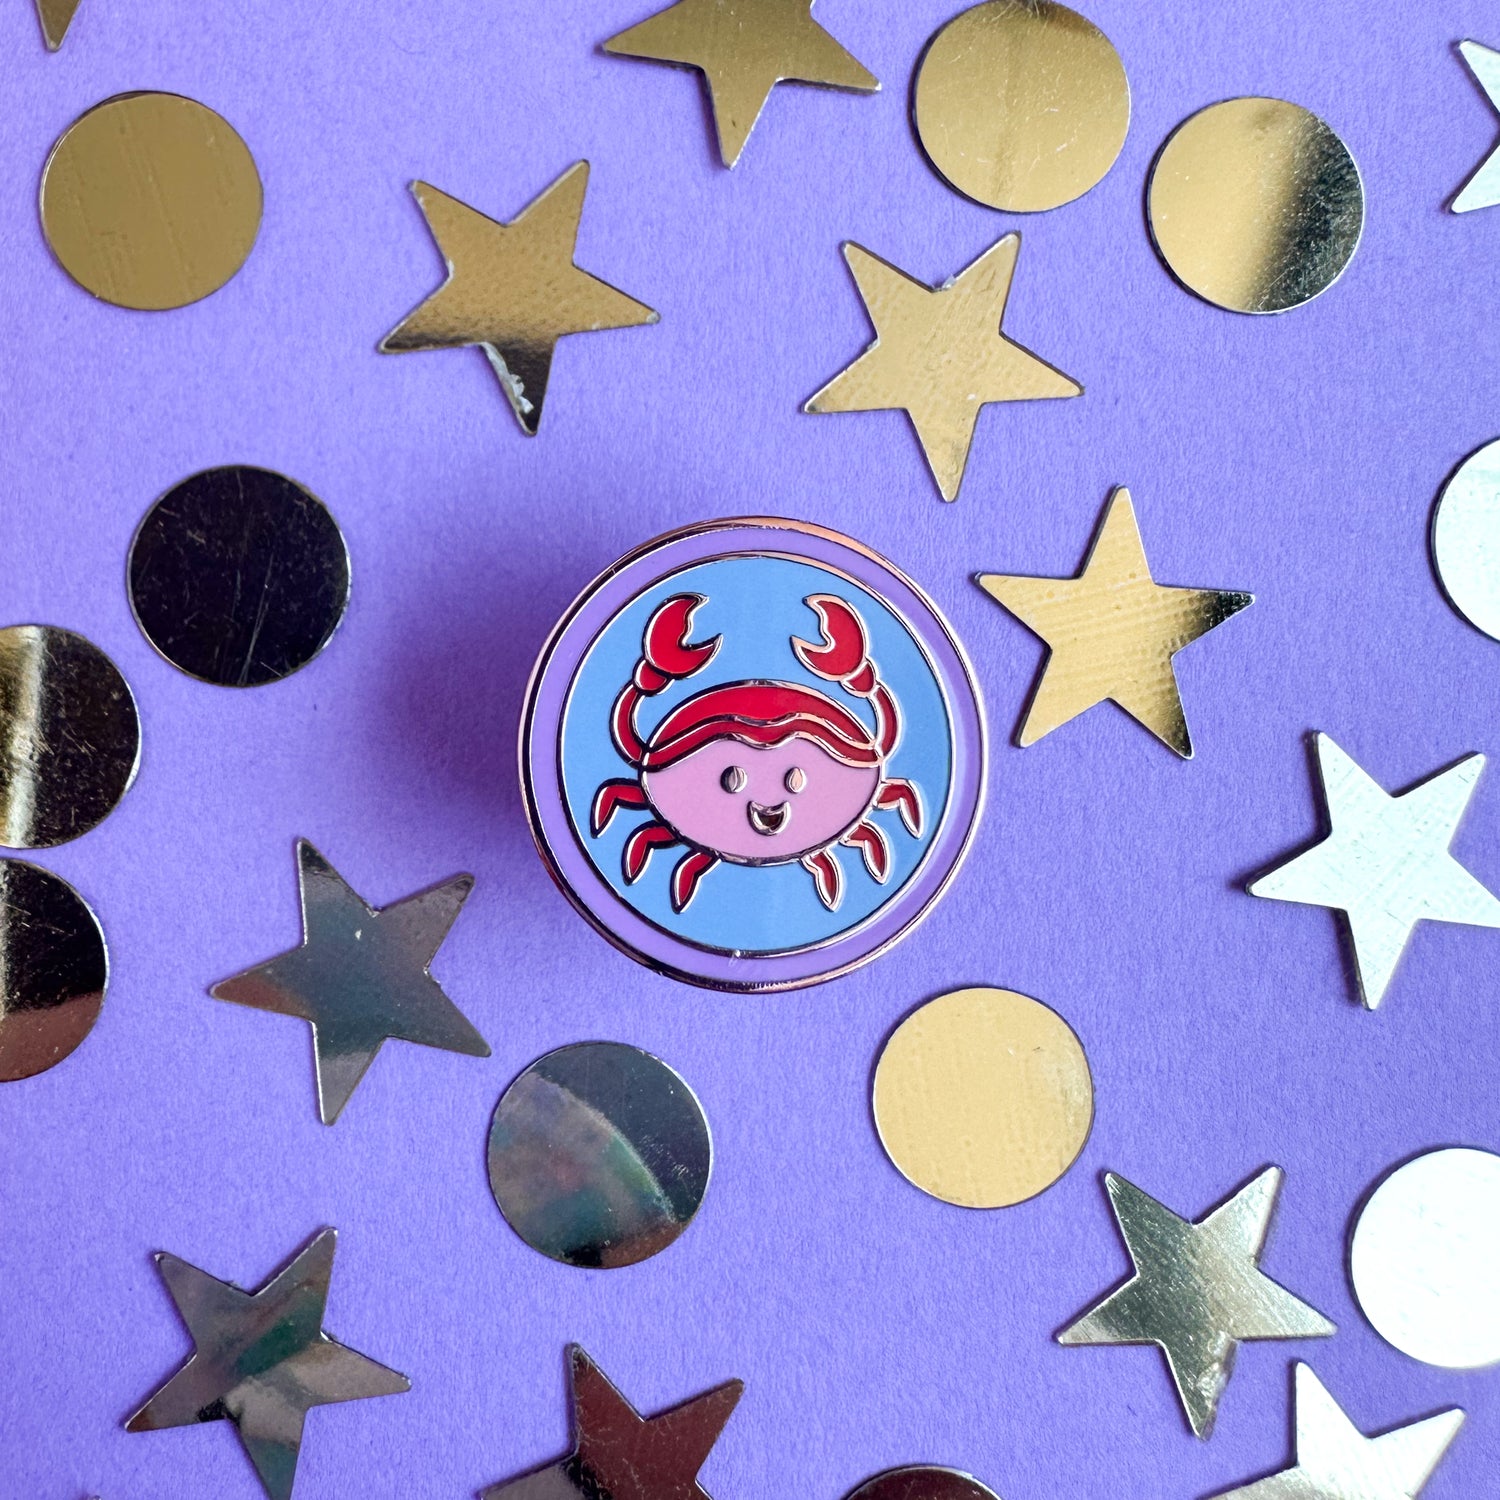 An enamel pin in the shape of a circle with a cute little crab illustration inside of it to represent Cancer in the zodiac. The pin is on a purple background with gold stars and circles around it. 